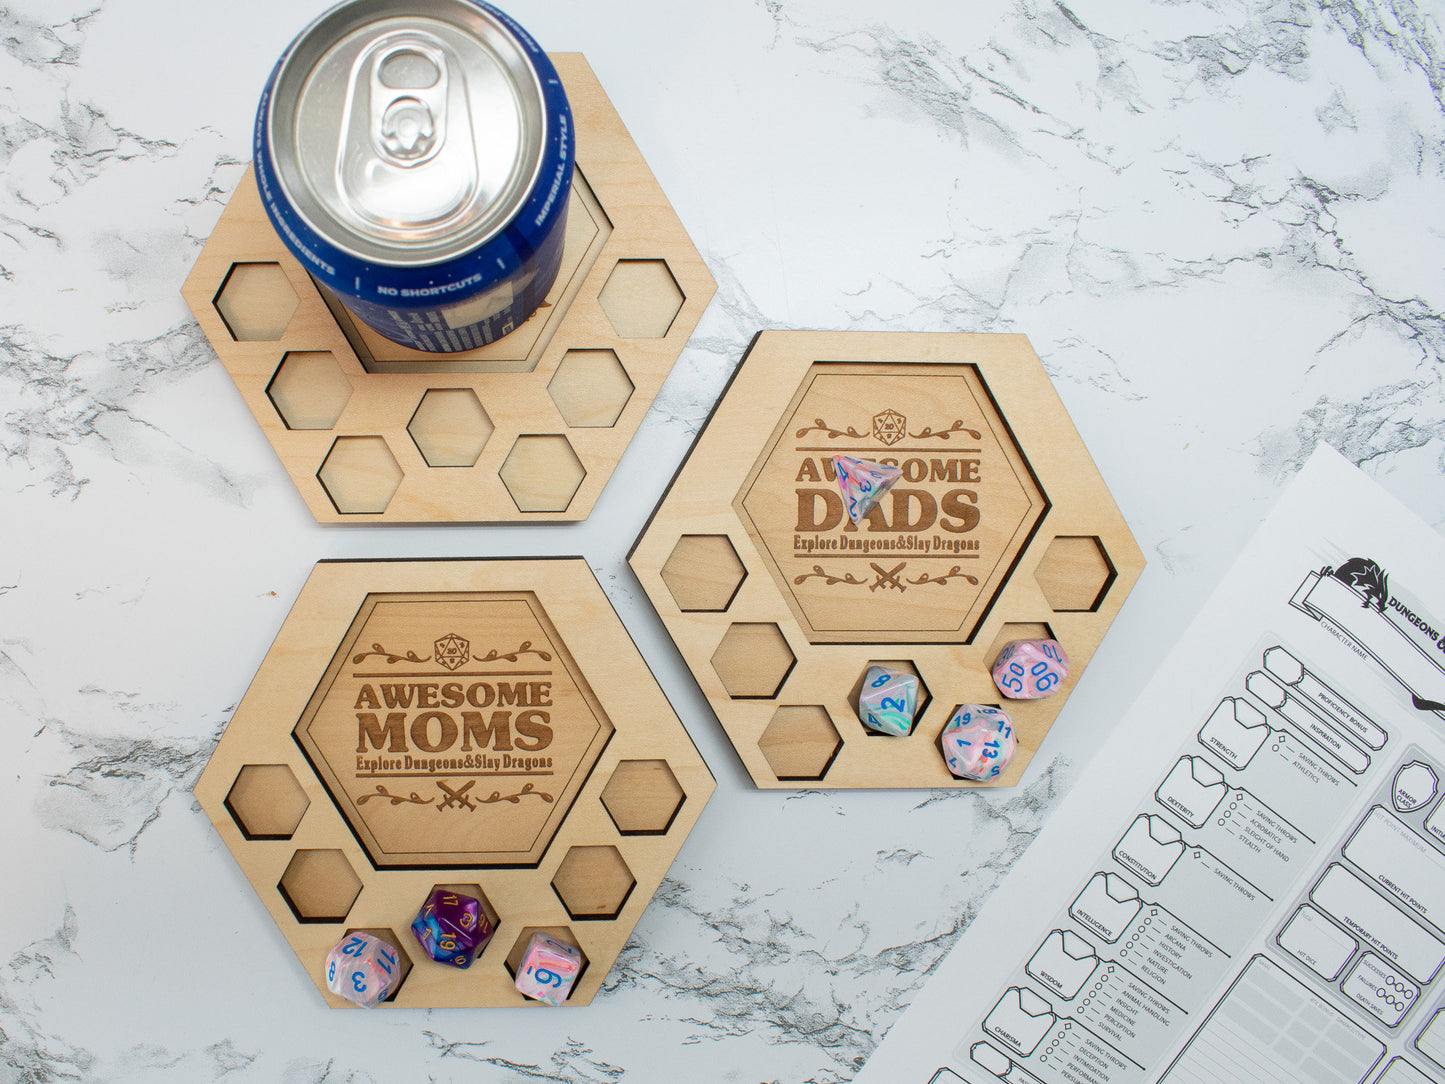 D&D Dice Tray Coasters for Mom and Dad, DnD / Pathfinder / Tabletop RPG Gaming Coasters